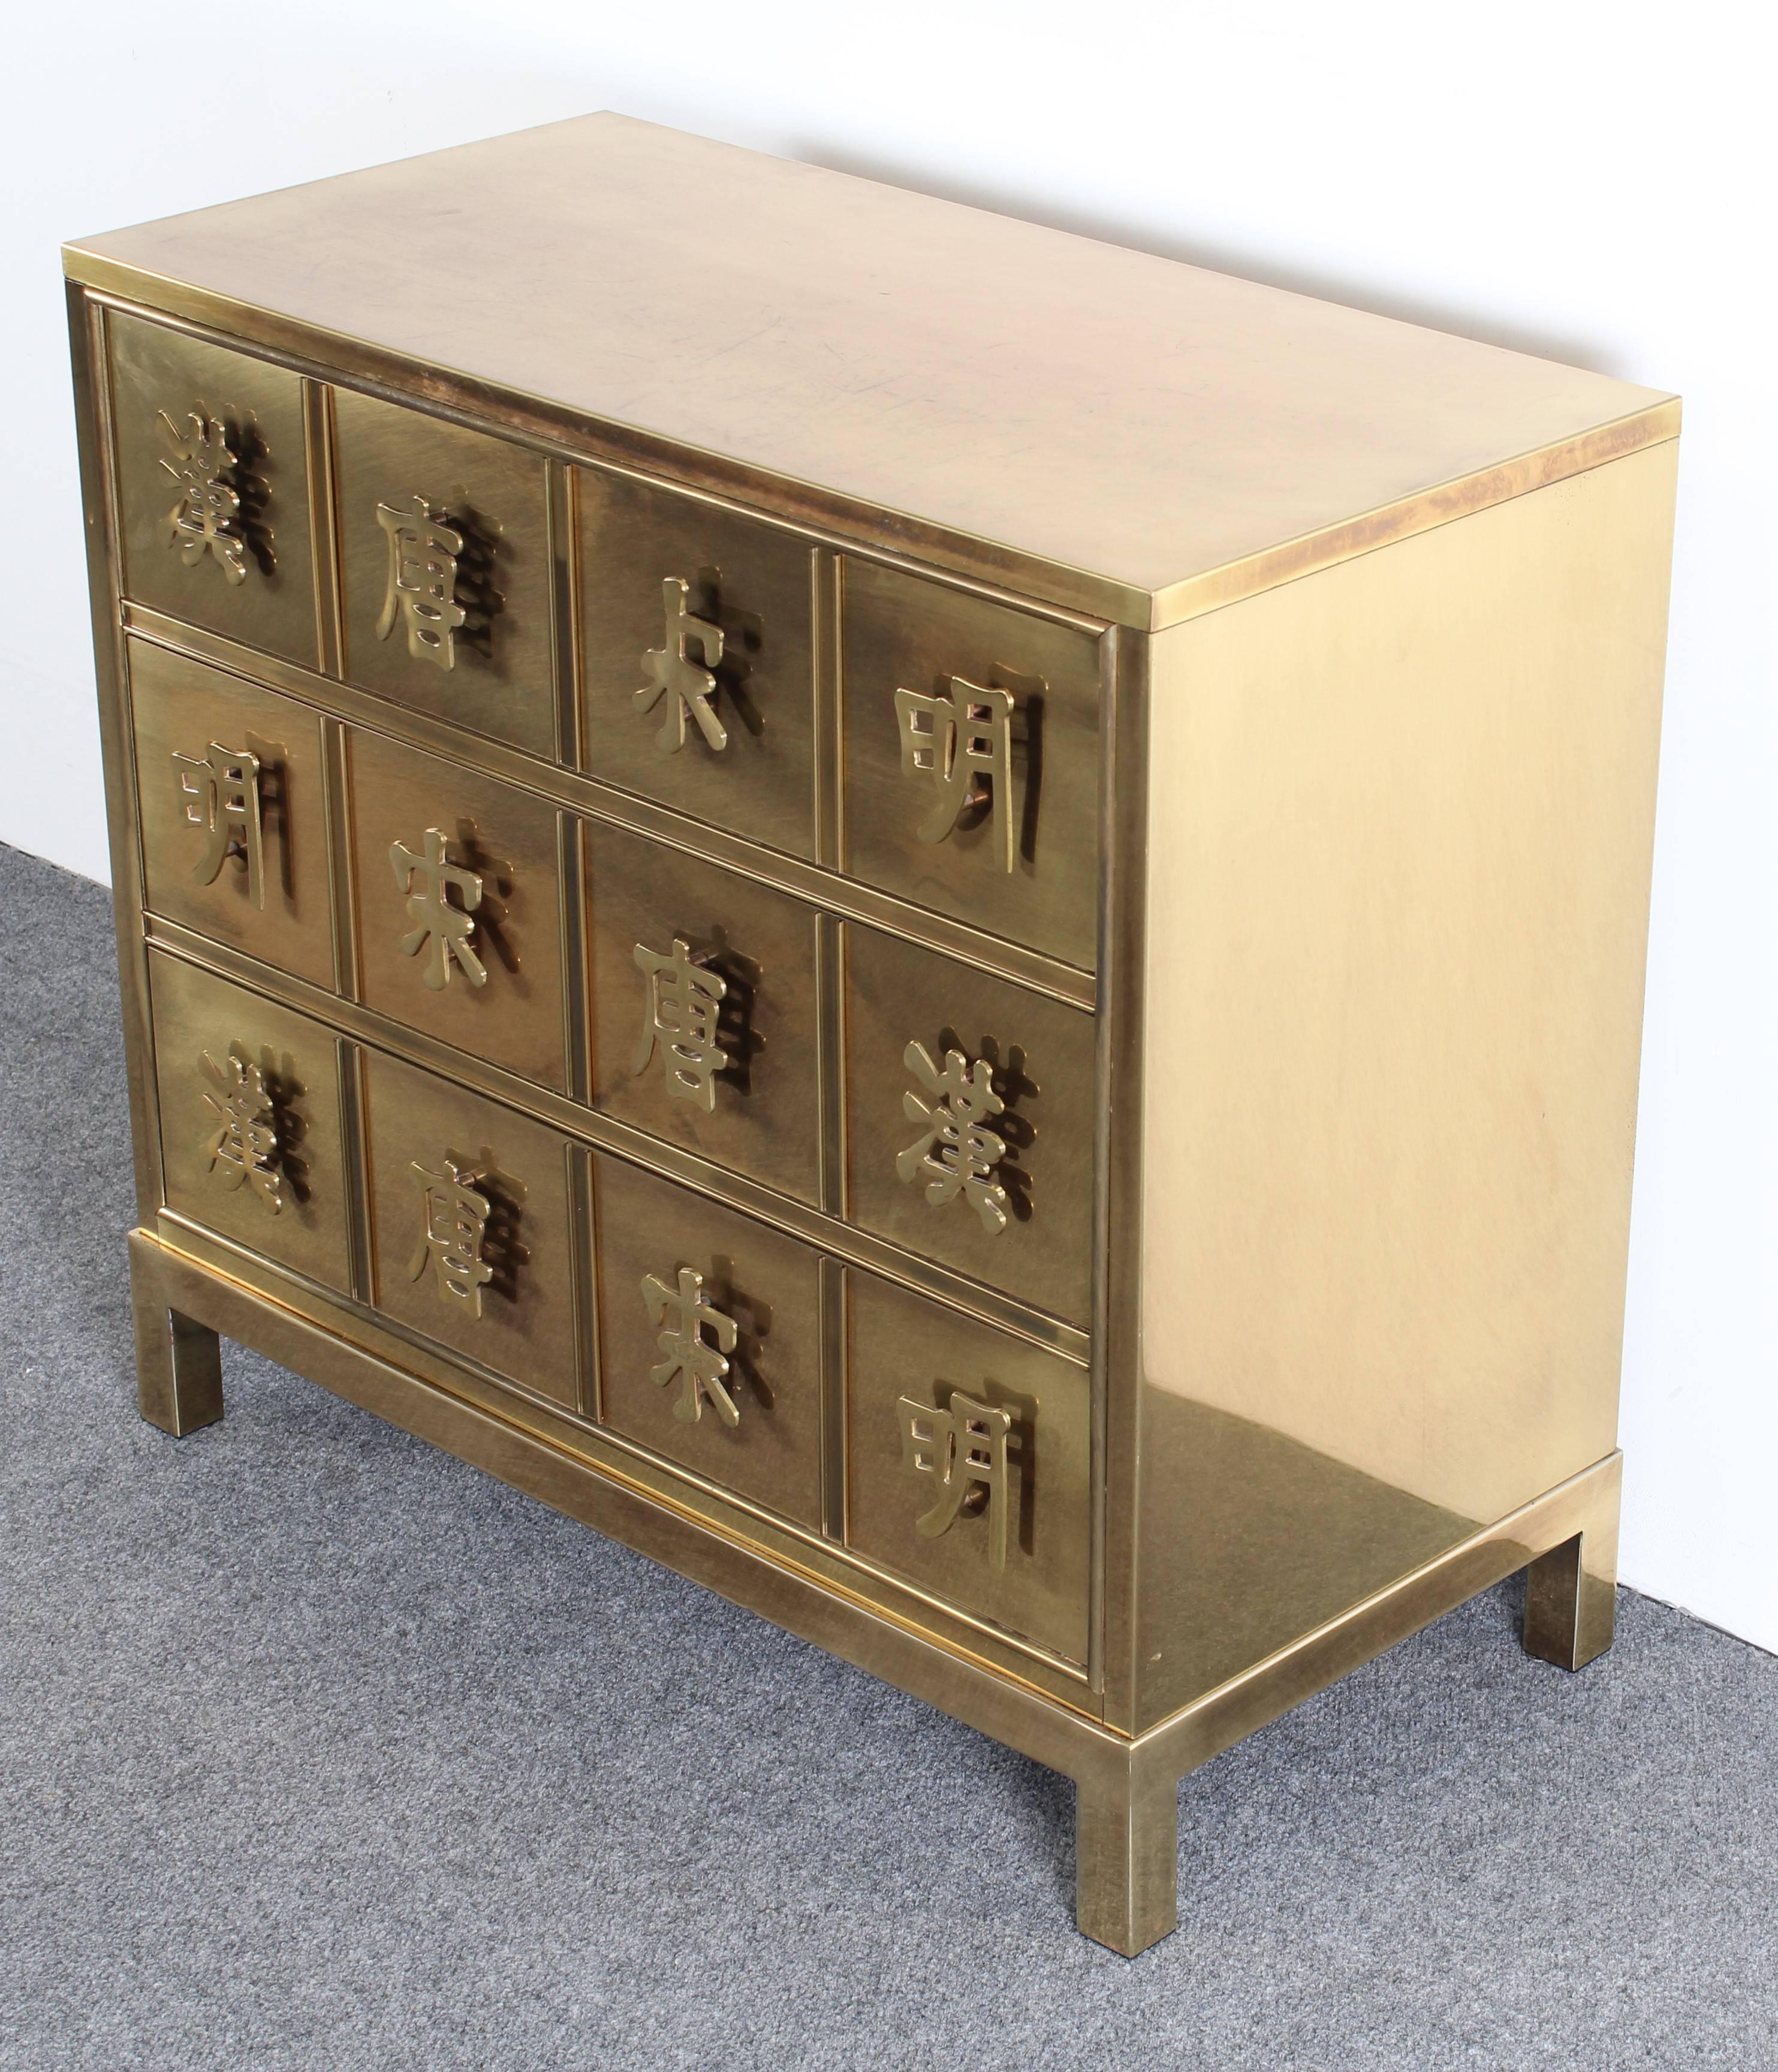 A stunning Mastercraft Asian style chest with Chinese or Japanese character brass pulls, 1970s. Well constructed with age appropriate wear. The cabinet has some minor spotting but overall is in very good condition. One handle has a very minor chip